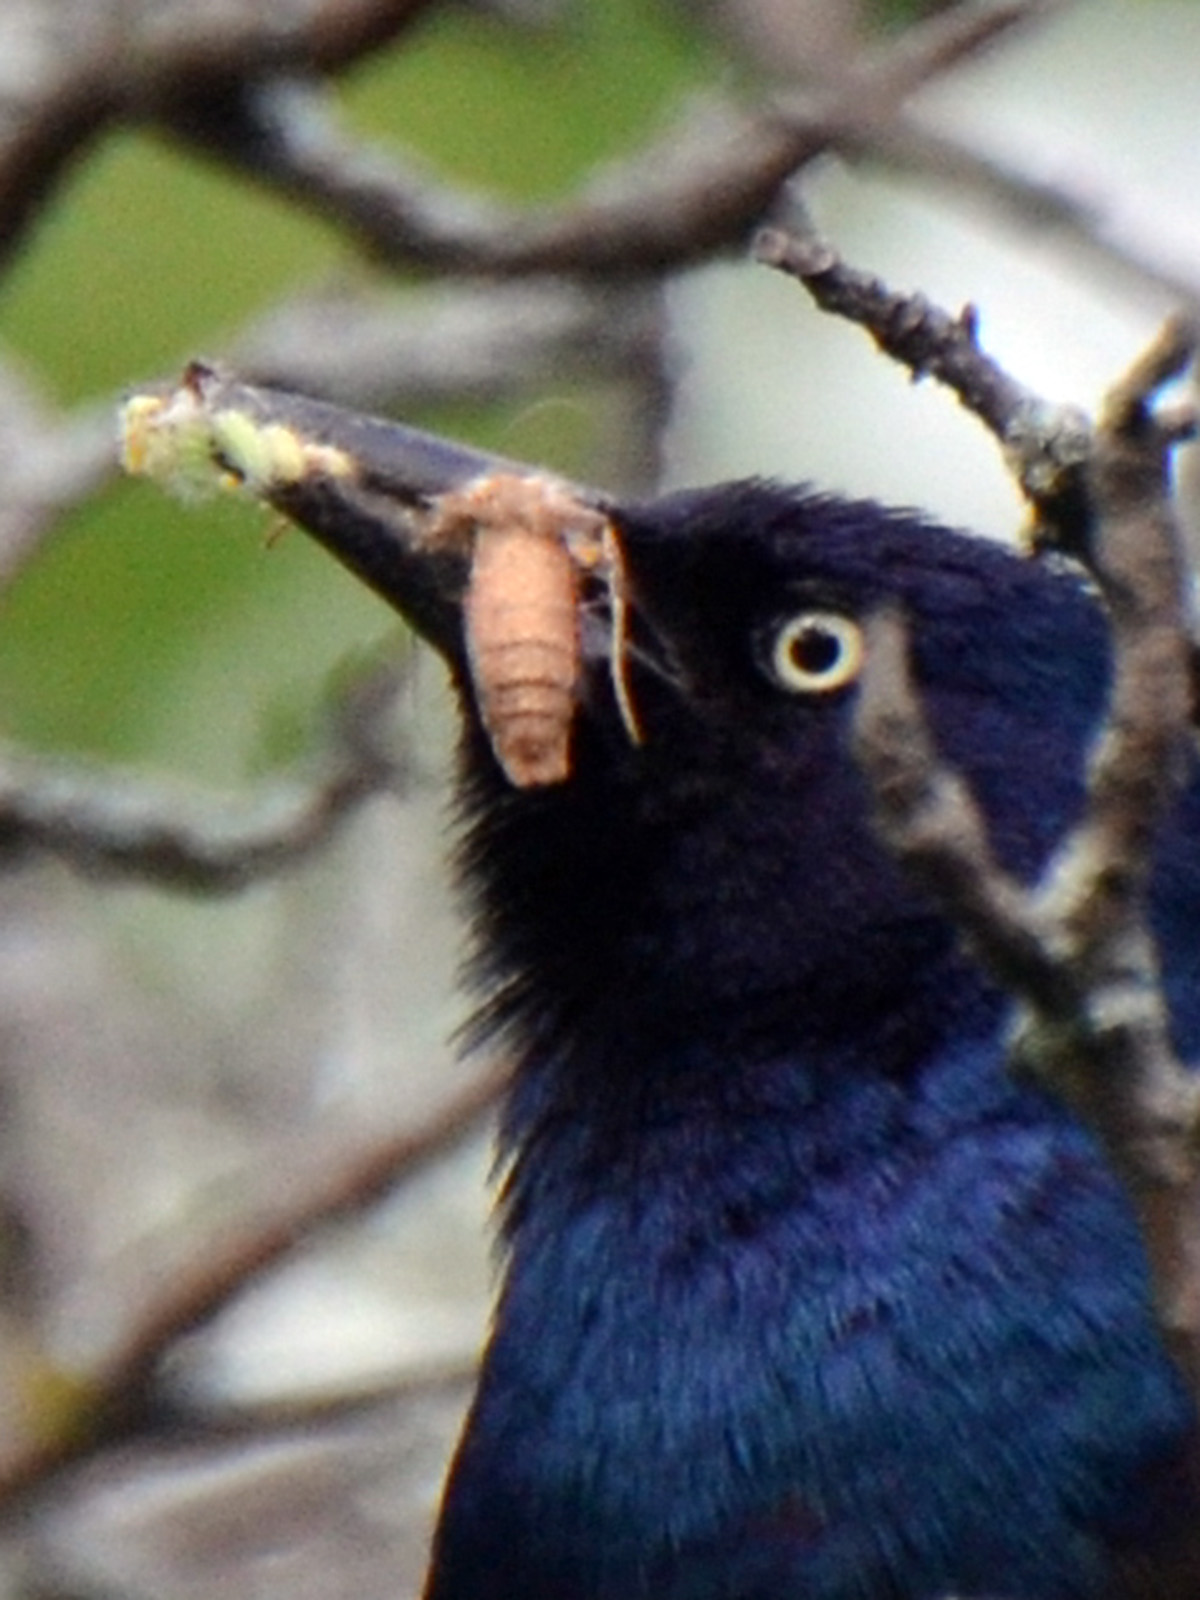 Grackle feeding insect to baby bird